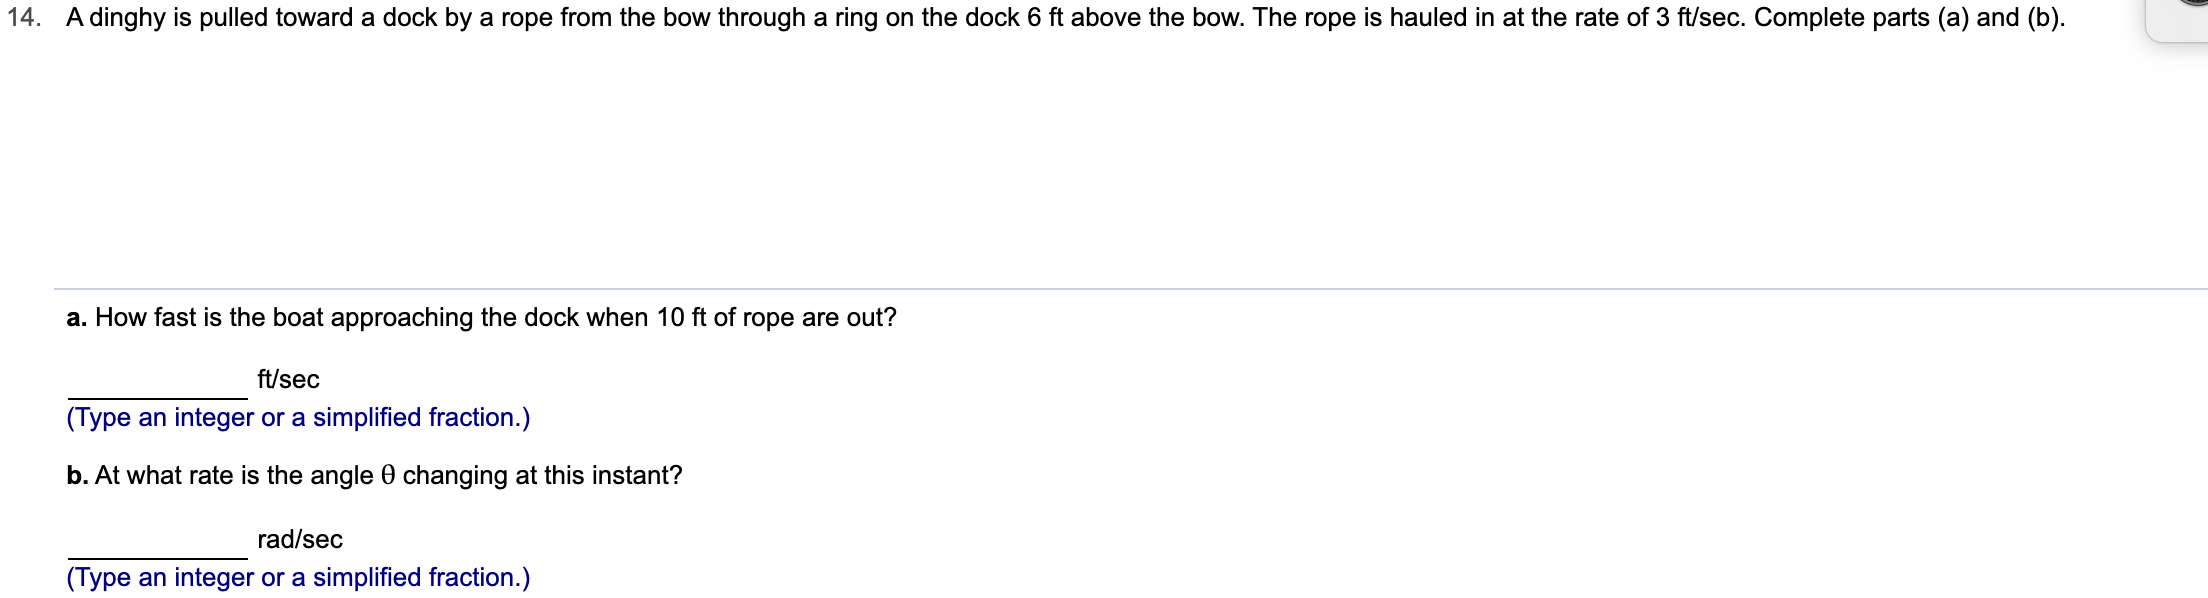 14. A dinghy is pulled toward a dock by a rope from the bow through a ring on the dock 6 ft above the bow. The rope is hauled in at the rate of 3 ft/sec. Complete parts (a) and (b)
a. How fast is the boat approaching the dock when 10 ft of rope are out?
ft/sec
(Type an integer or a simplified fraction.)
b. At what rate is the angle 0 changing at this instant?
rad/sec
(Type an integer or a simplified fraction.)
